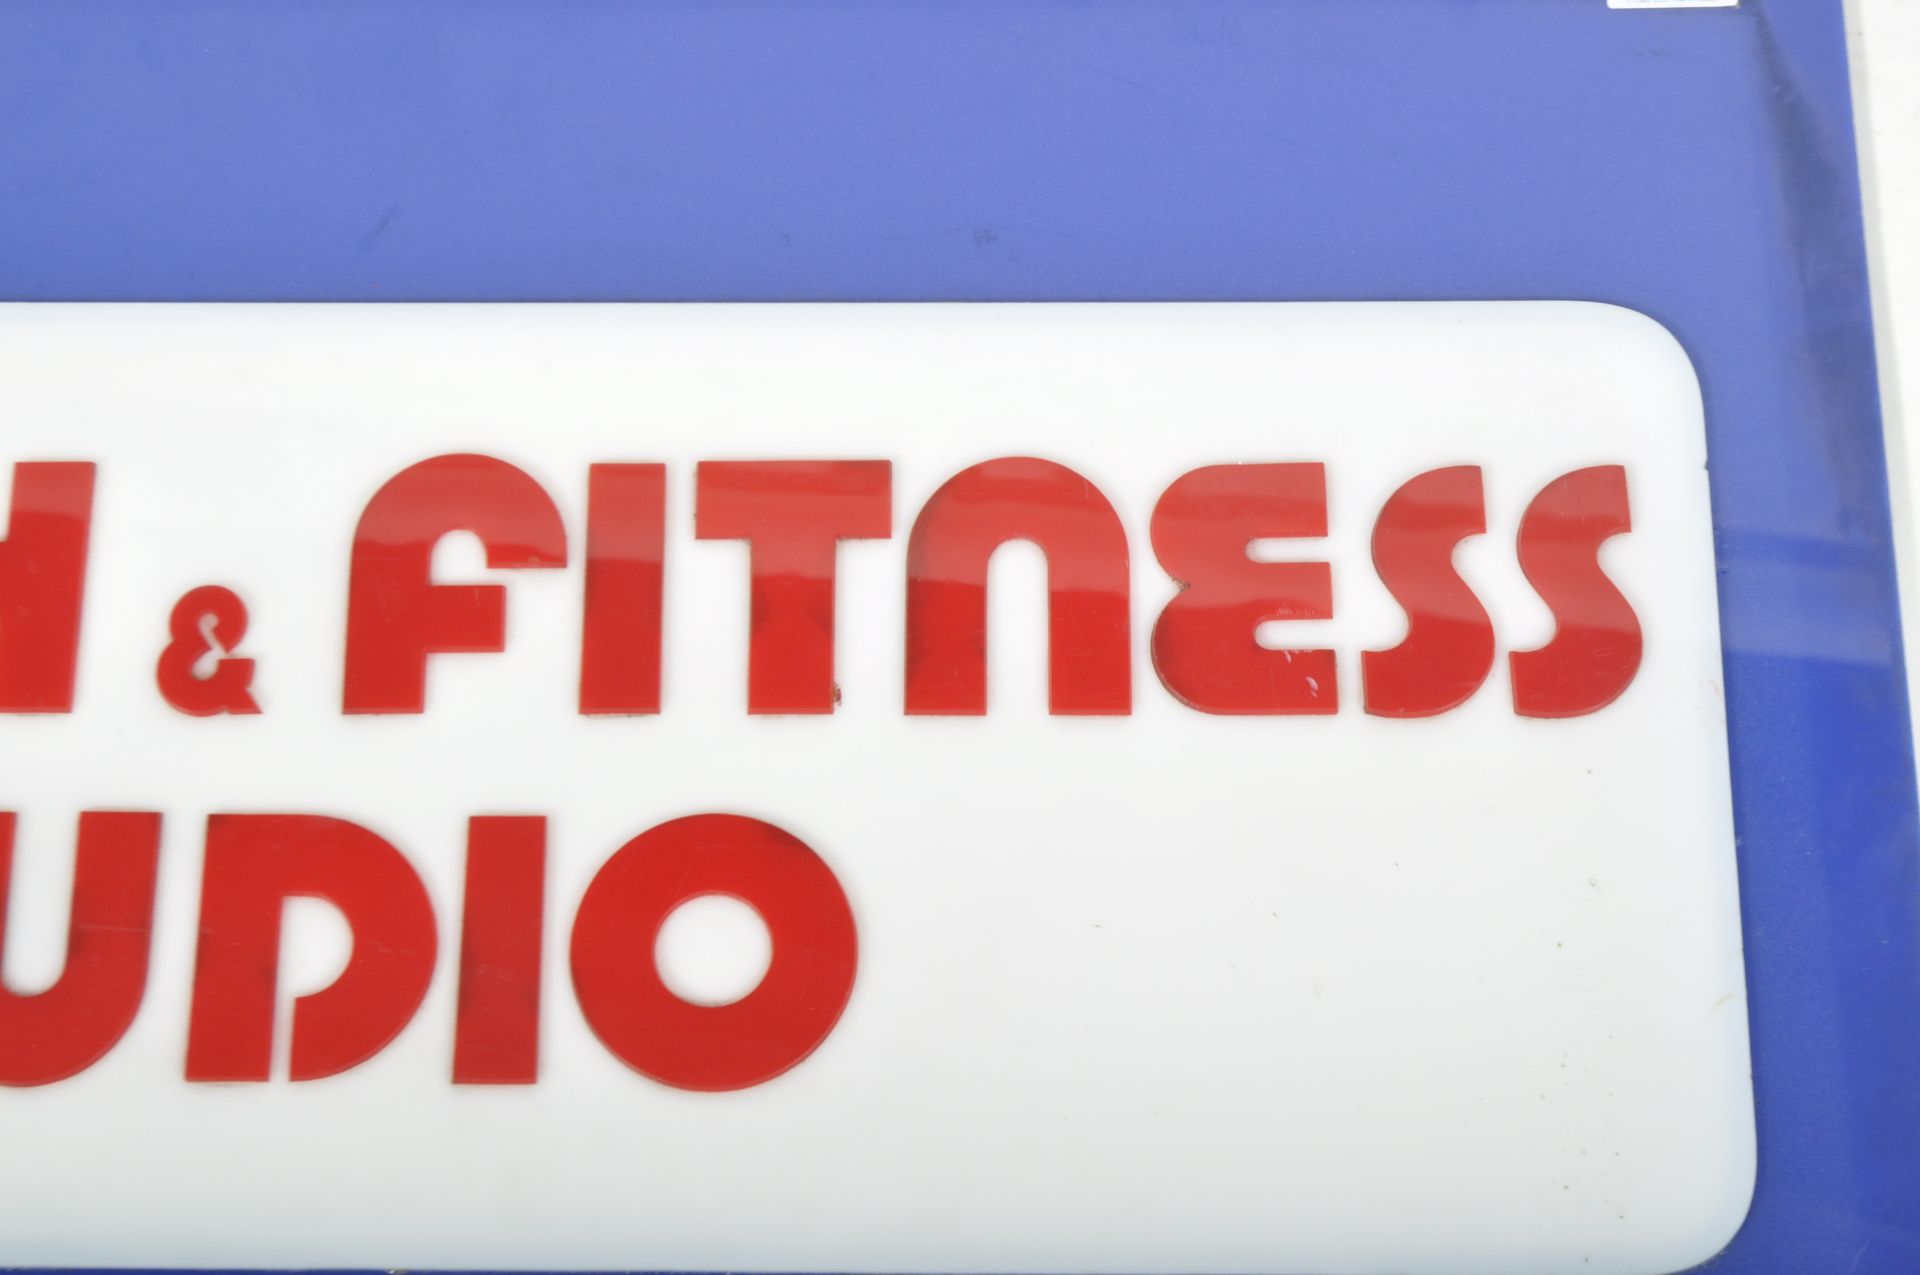 ACRYLIC FORMED HEALTH & FITNESS STUDIO ADVERTISING SIGN - Image 3 of 4